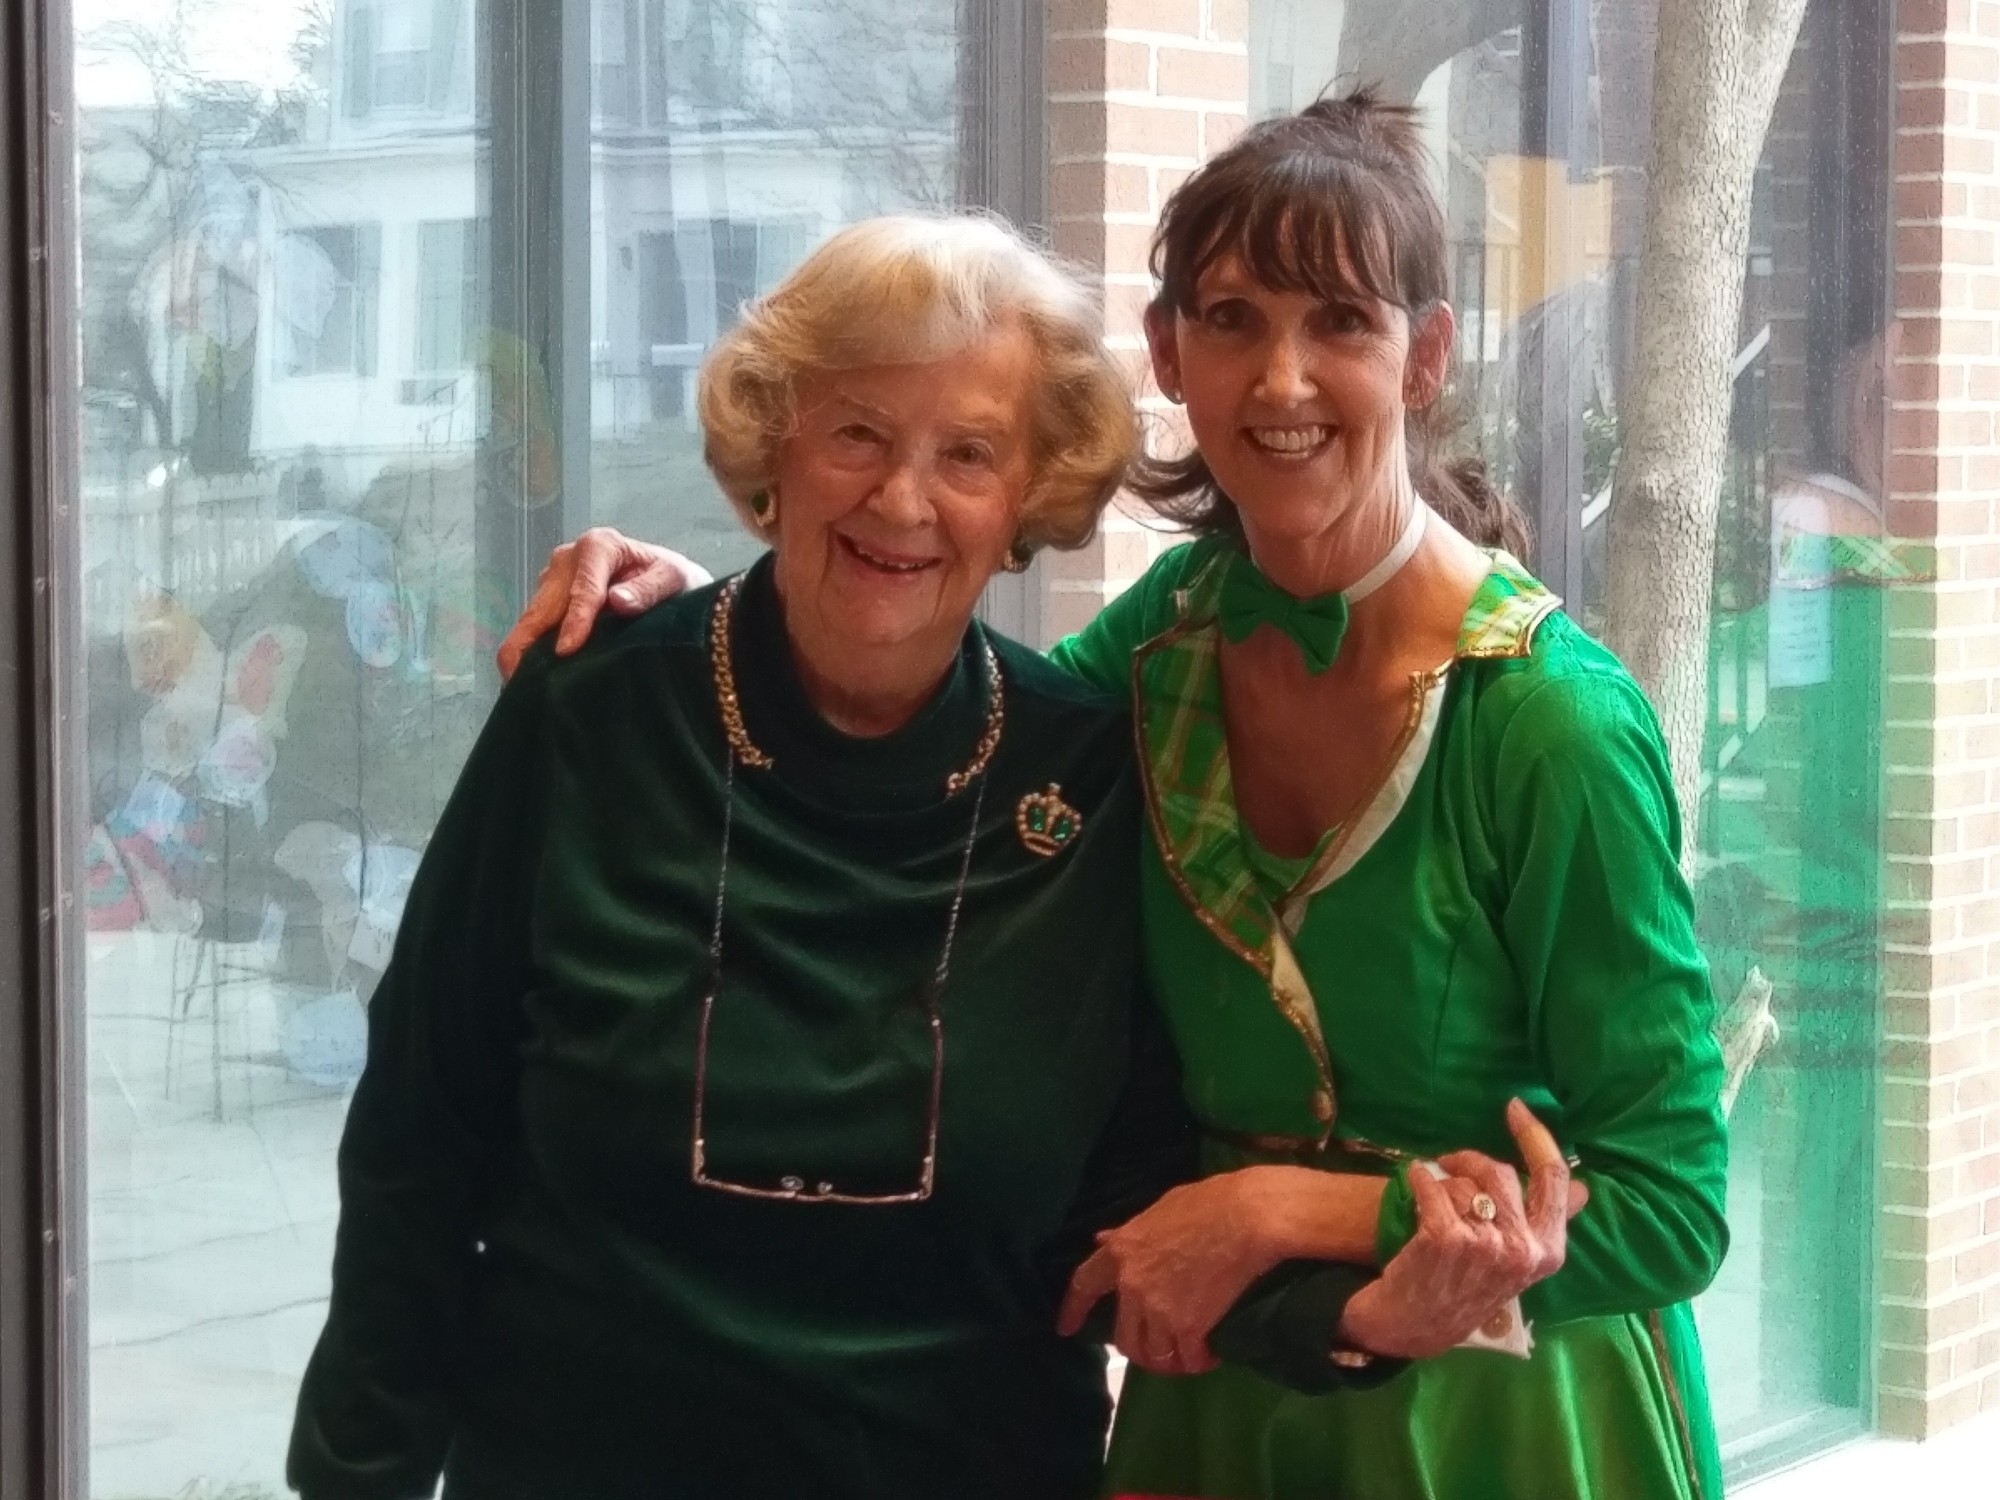 St Pats with staff and resident